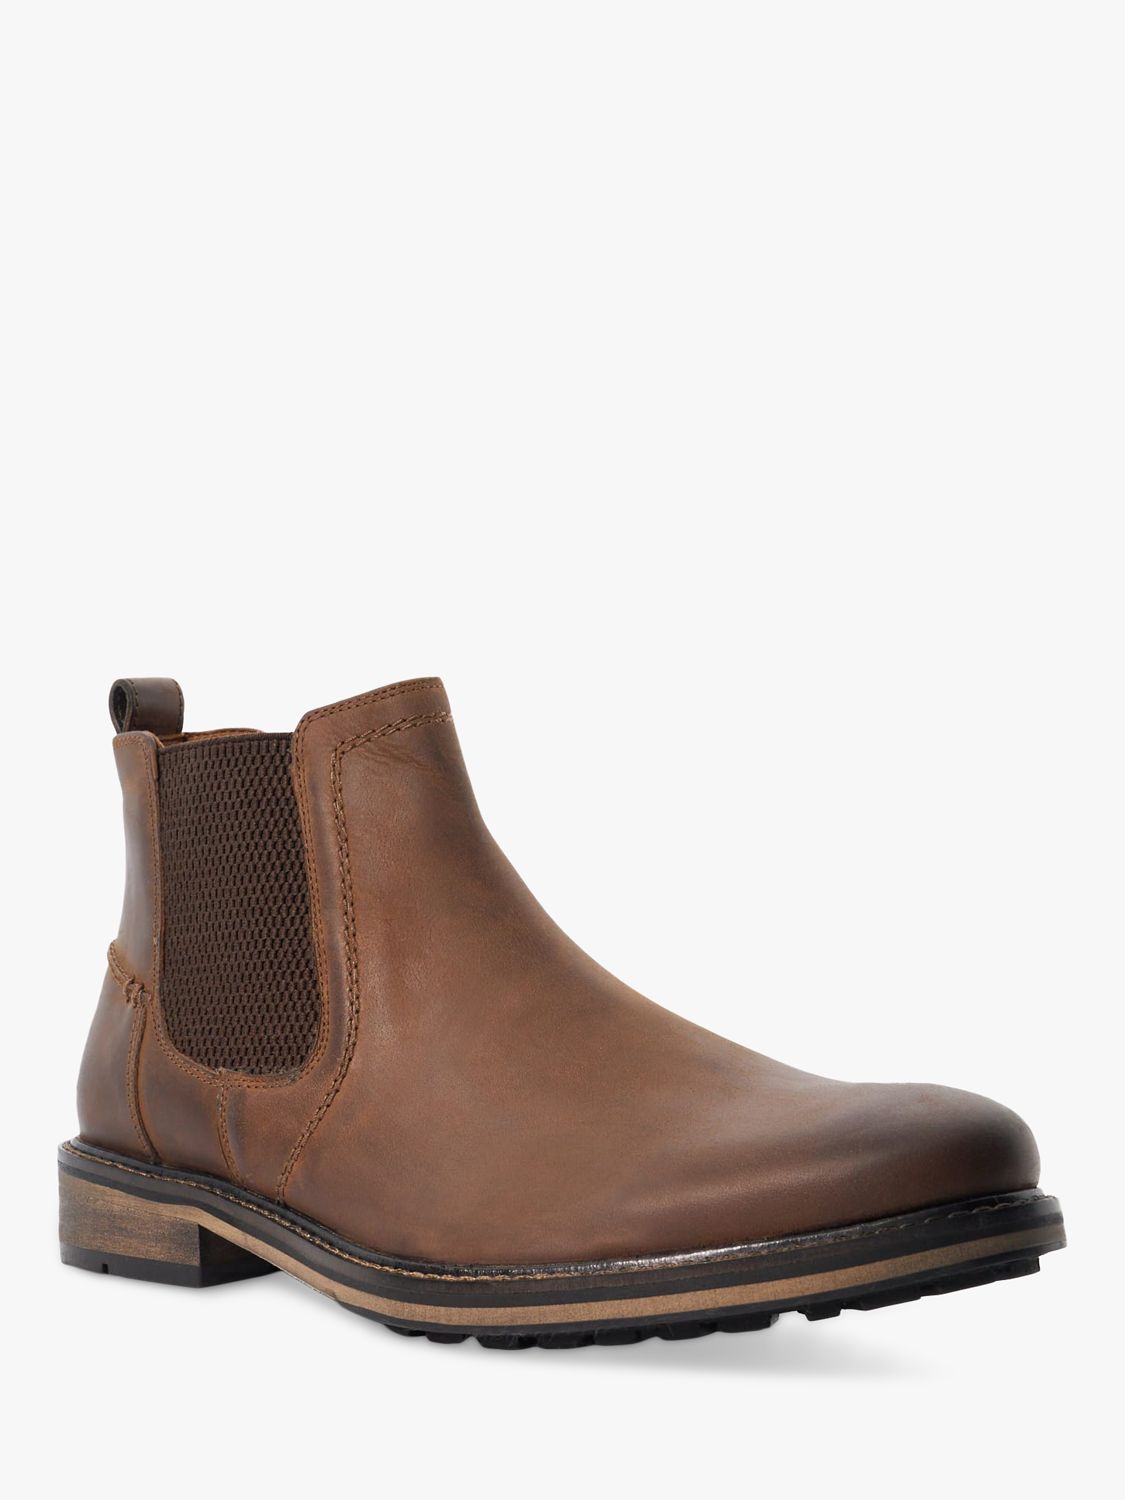 Dune Chorleys Leather Boots, Brown at John Lewis & Partners